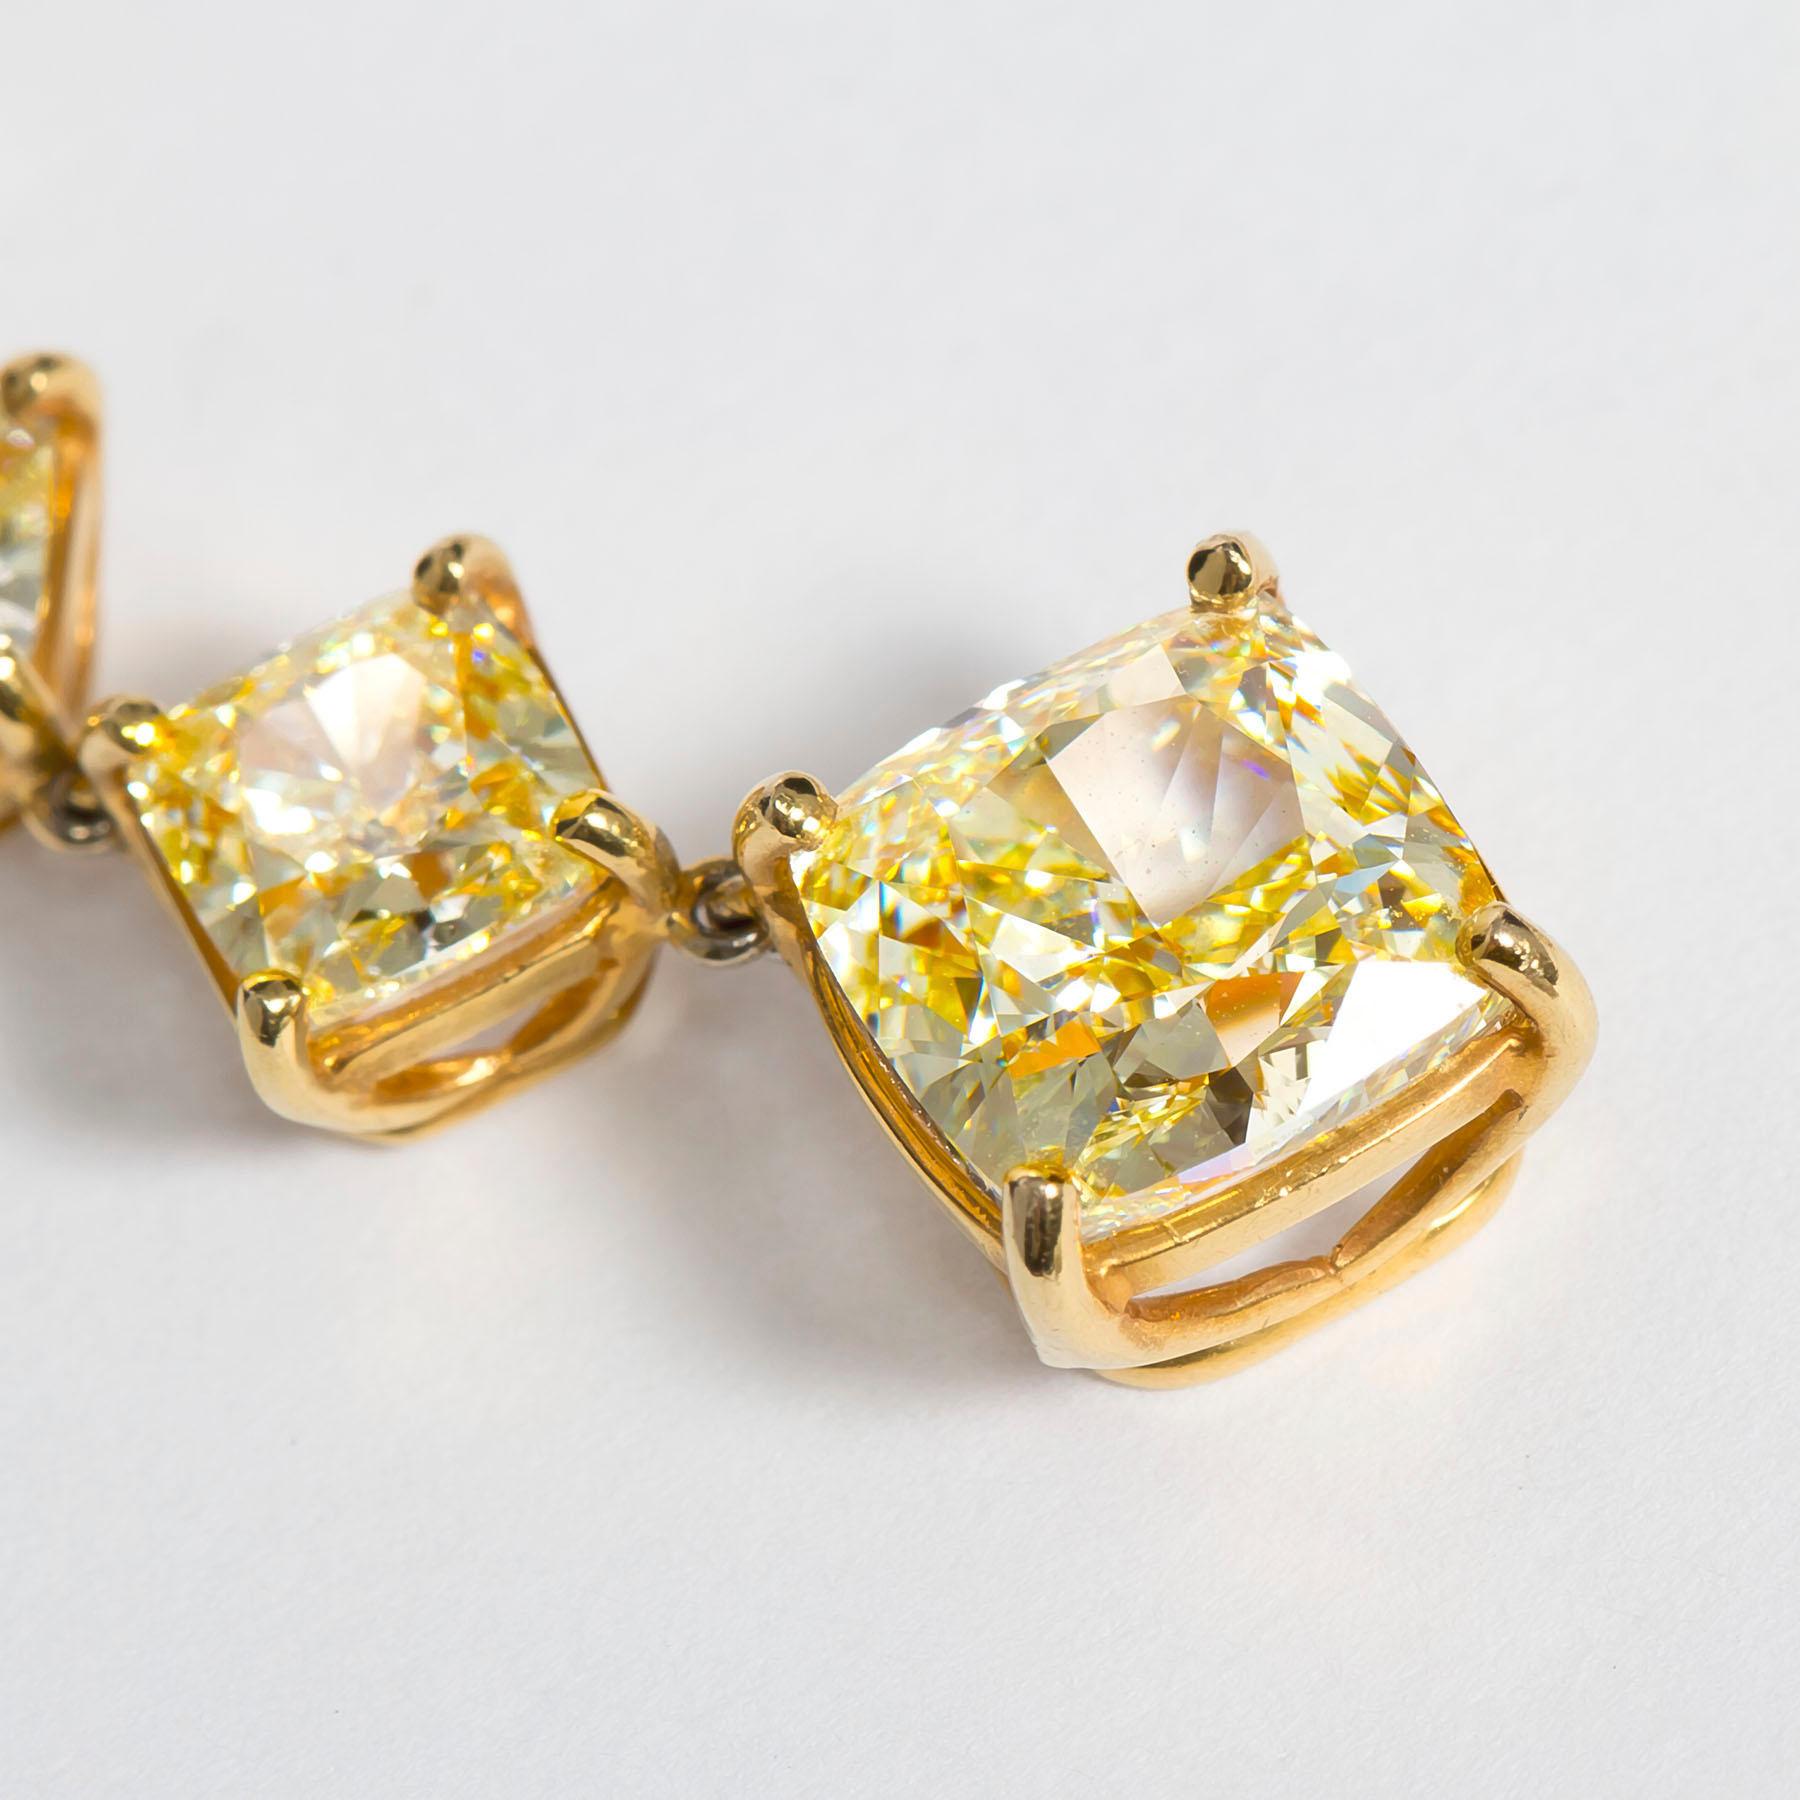 These 18 karat yellow gold Fancy Light Yellow Cushion Dangle Earrings with 16.50 total carats of diamonds are a showstopper! The choice of fancy light yellow diamonds, cushion cut, and the substantial total carat weight contribute to a piece that is